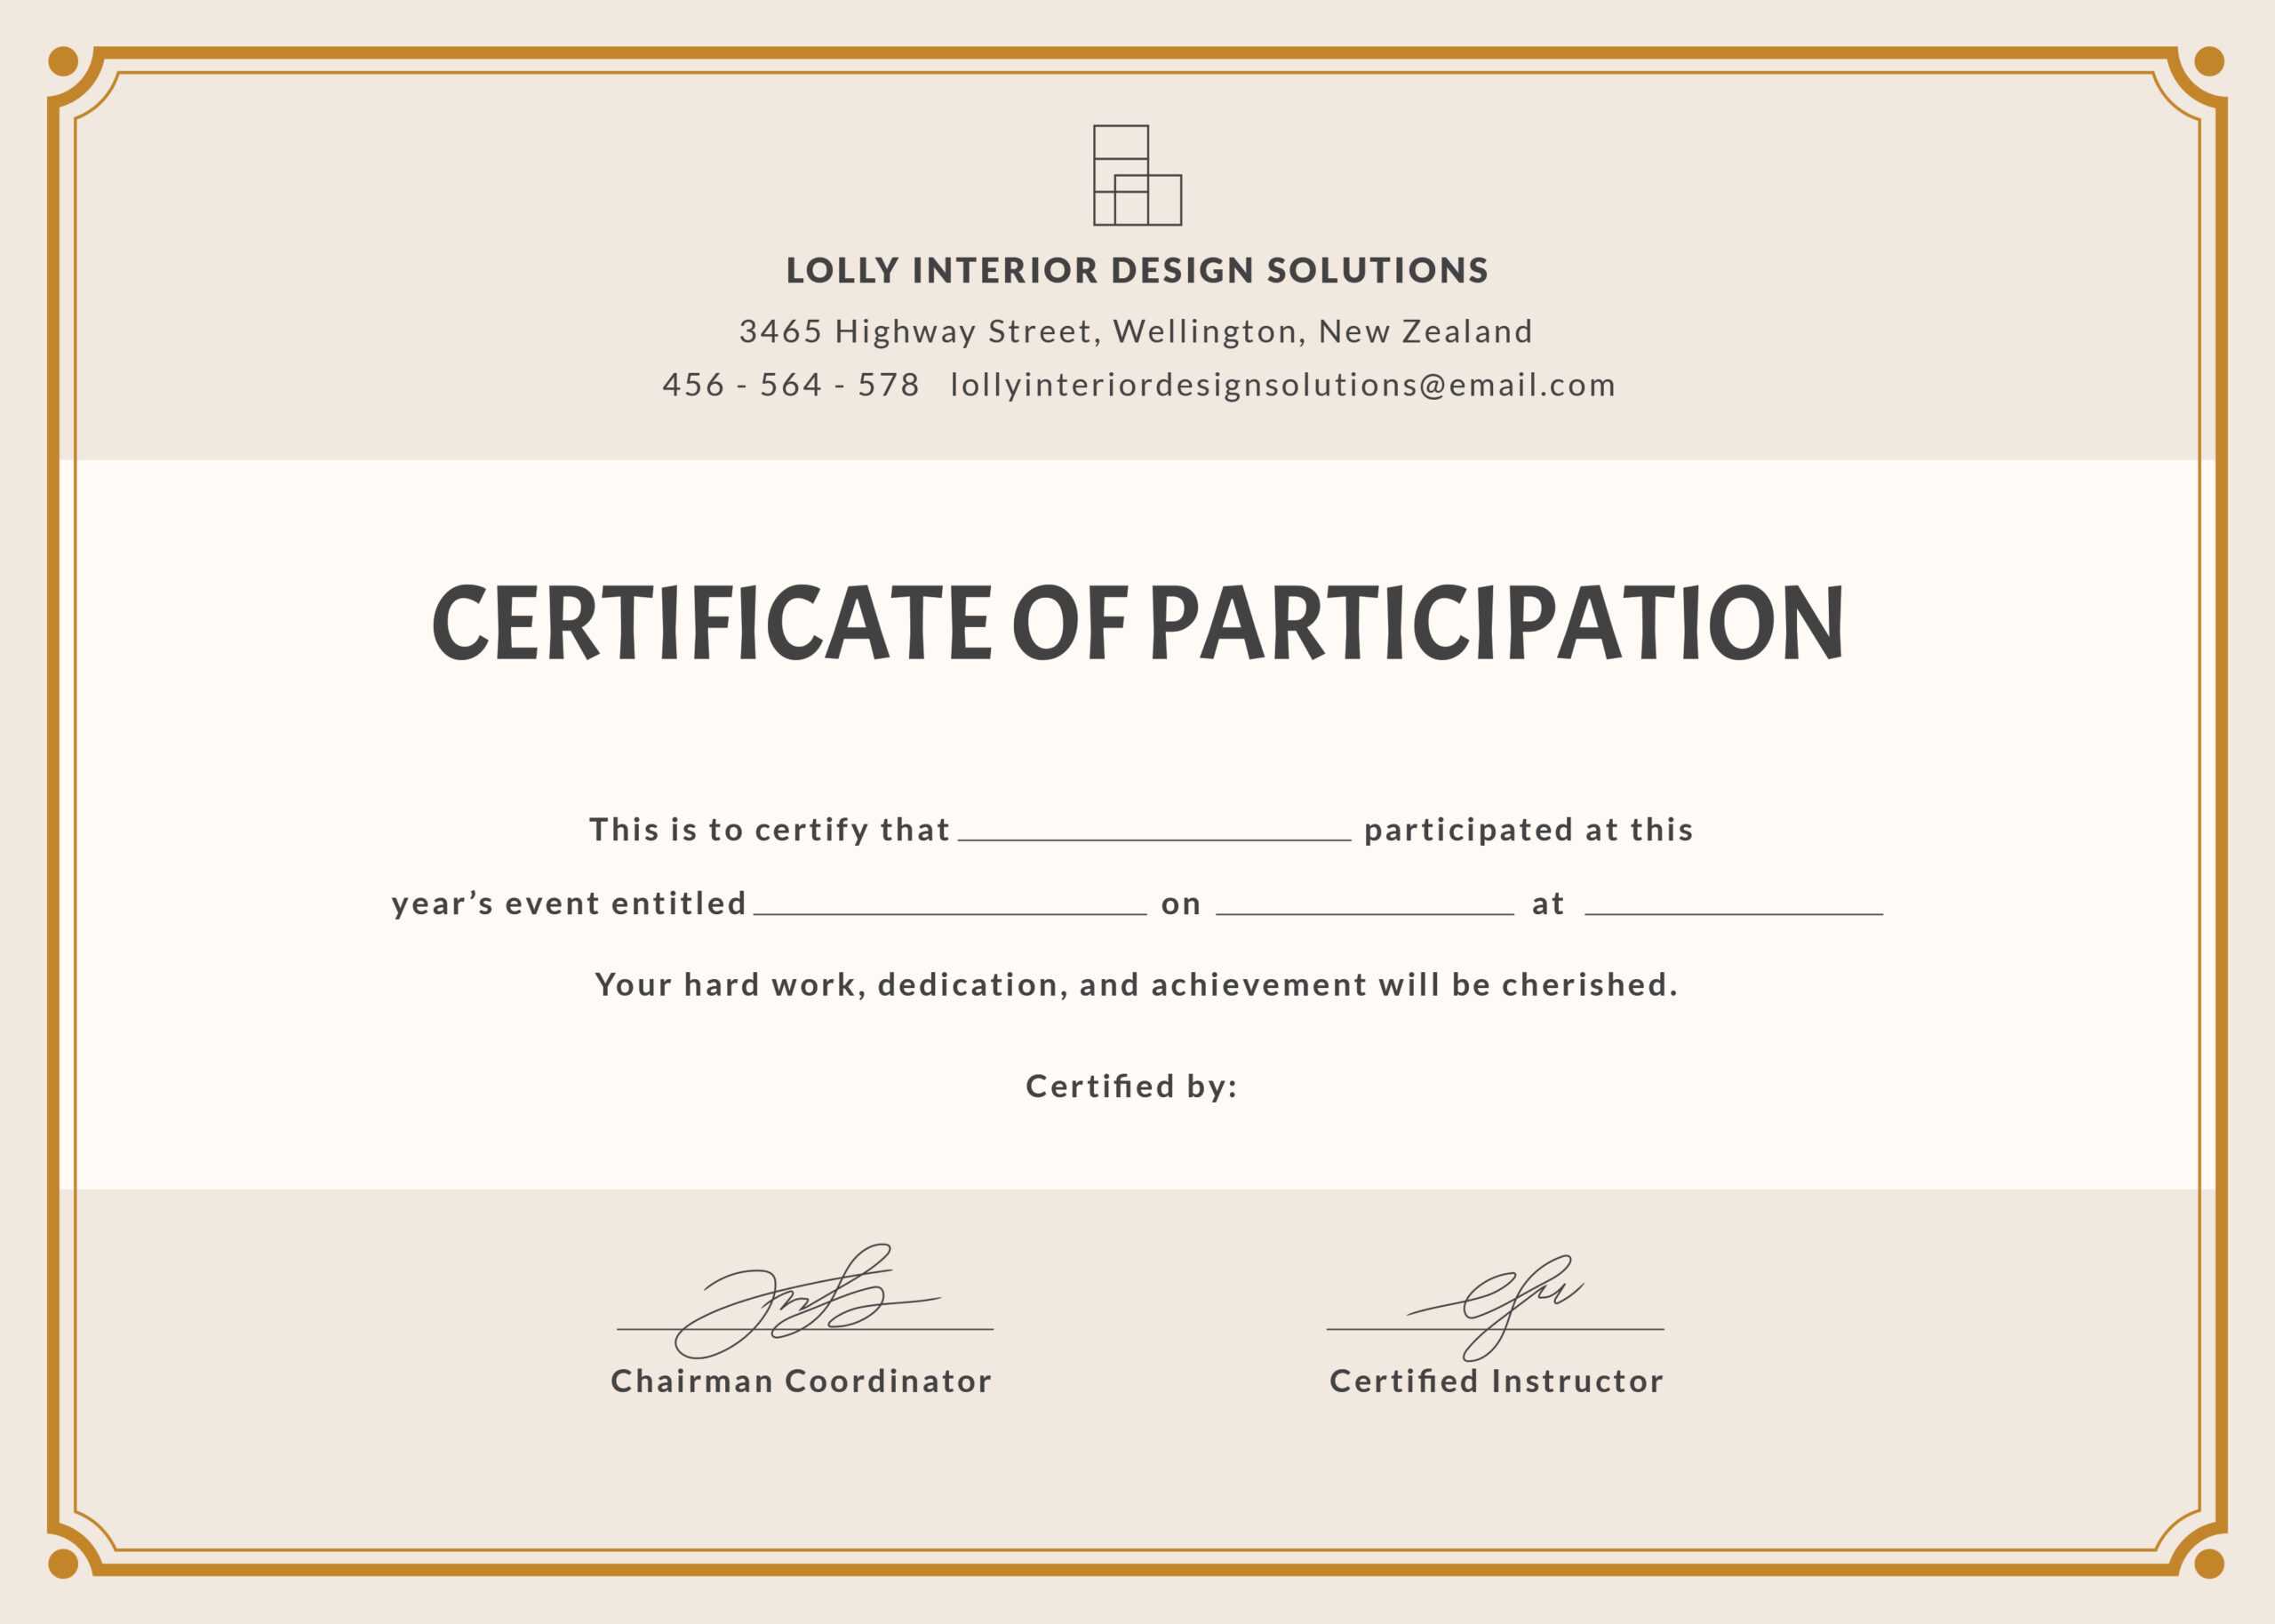 Certificate Of Participation Wording - Milas Regarding Templates For Certificates Of Participation